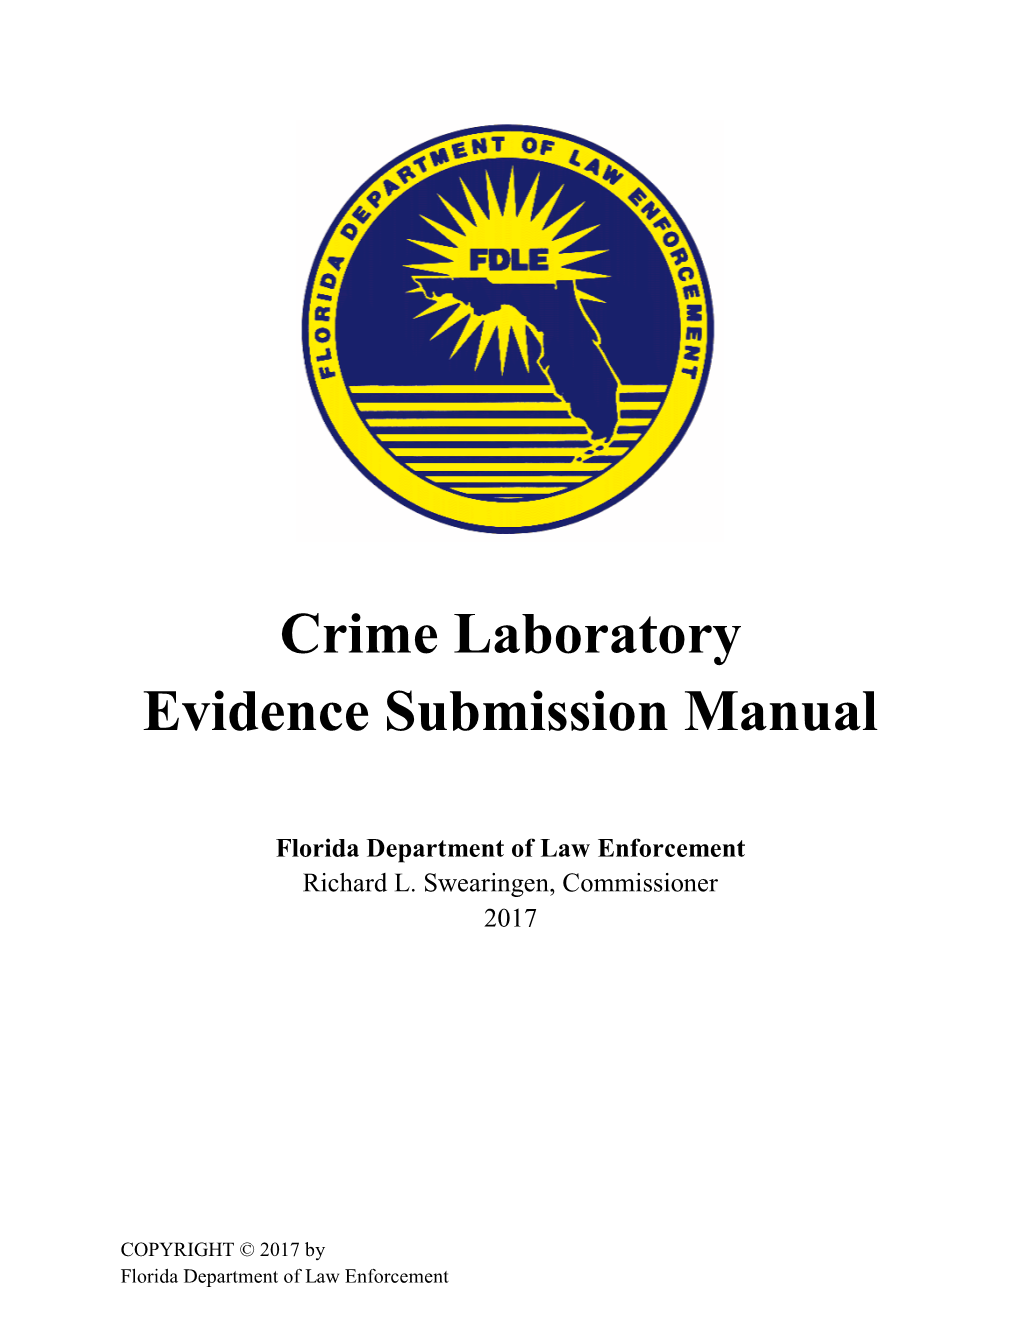 Crime Laboratory Evidence Submission Manual